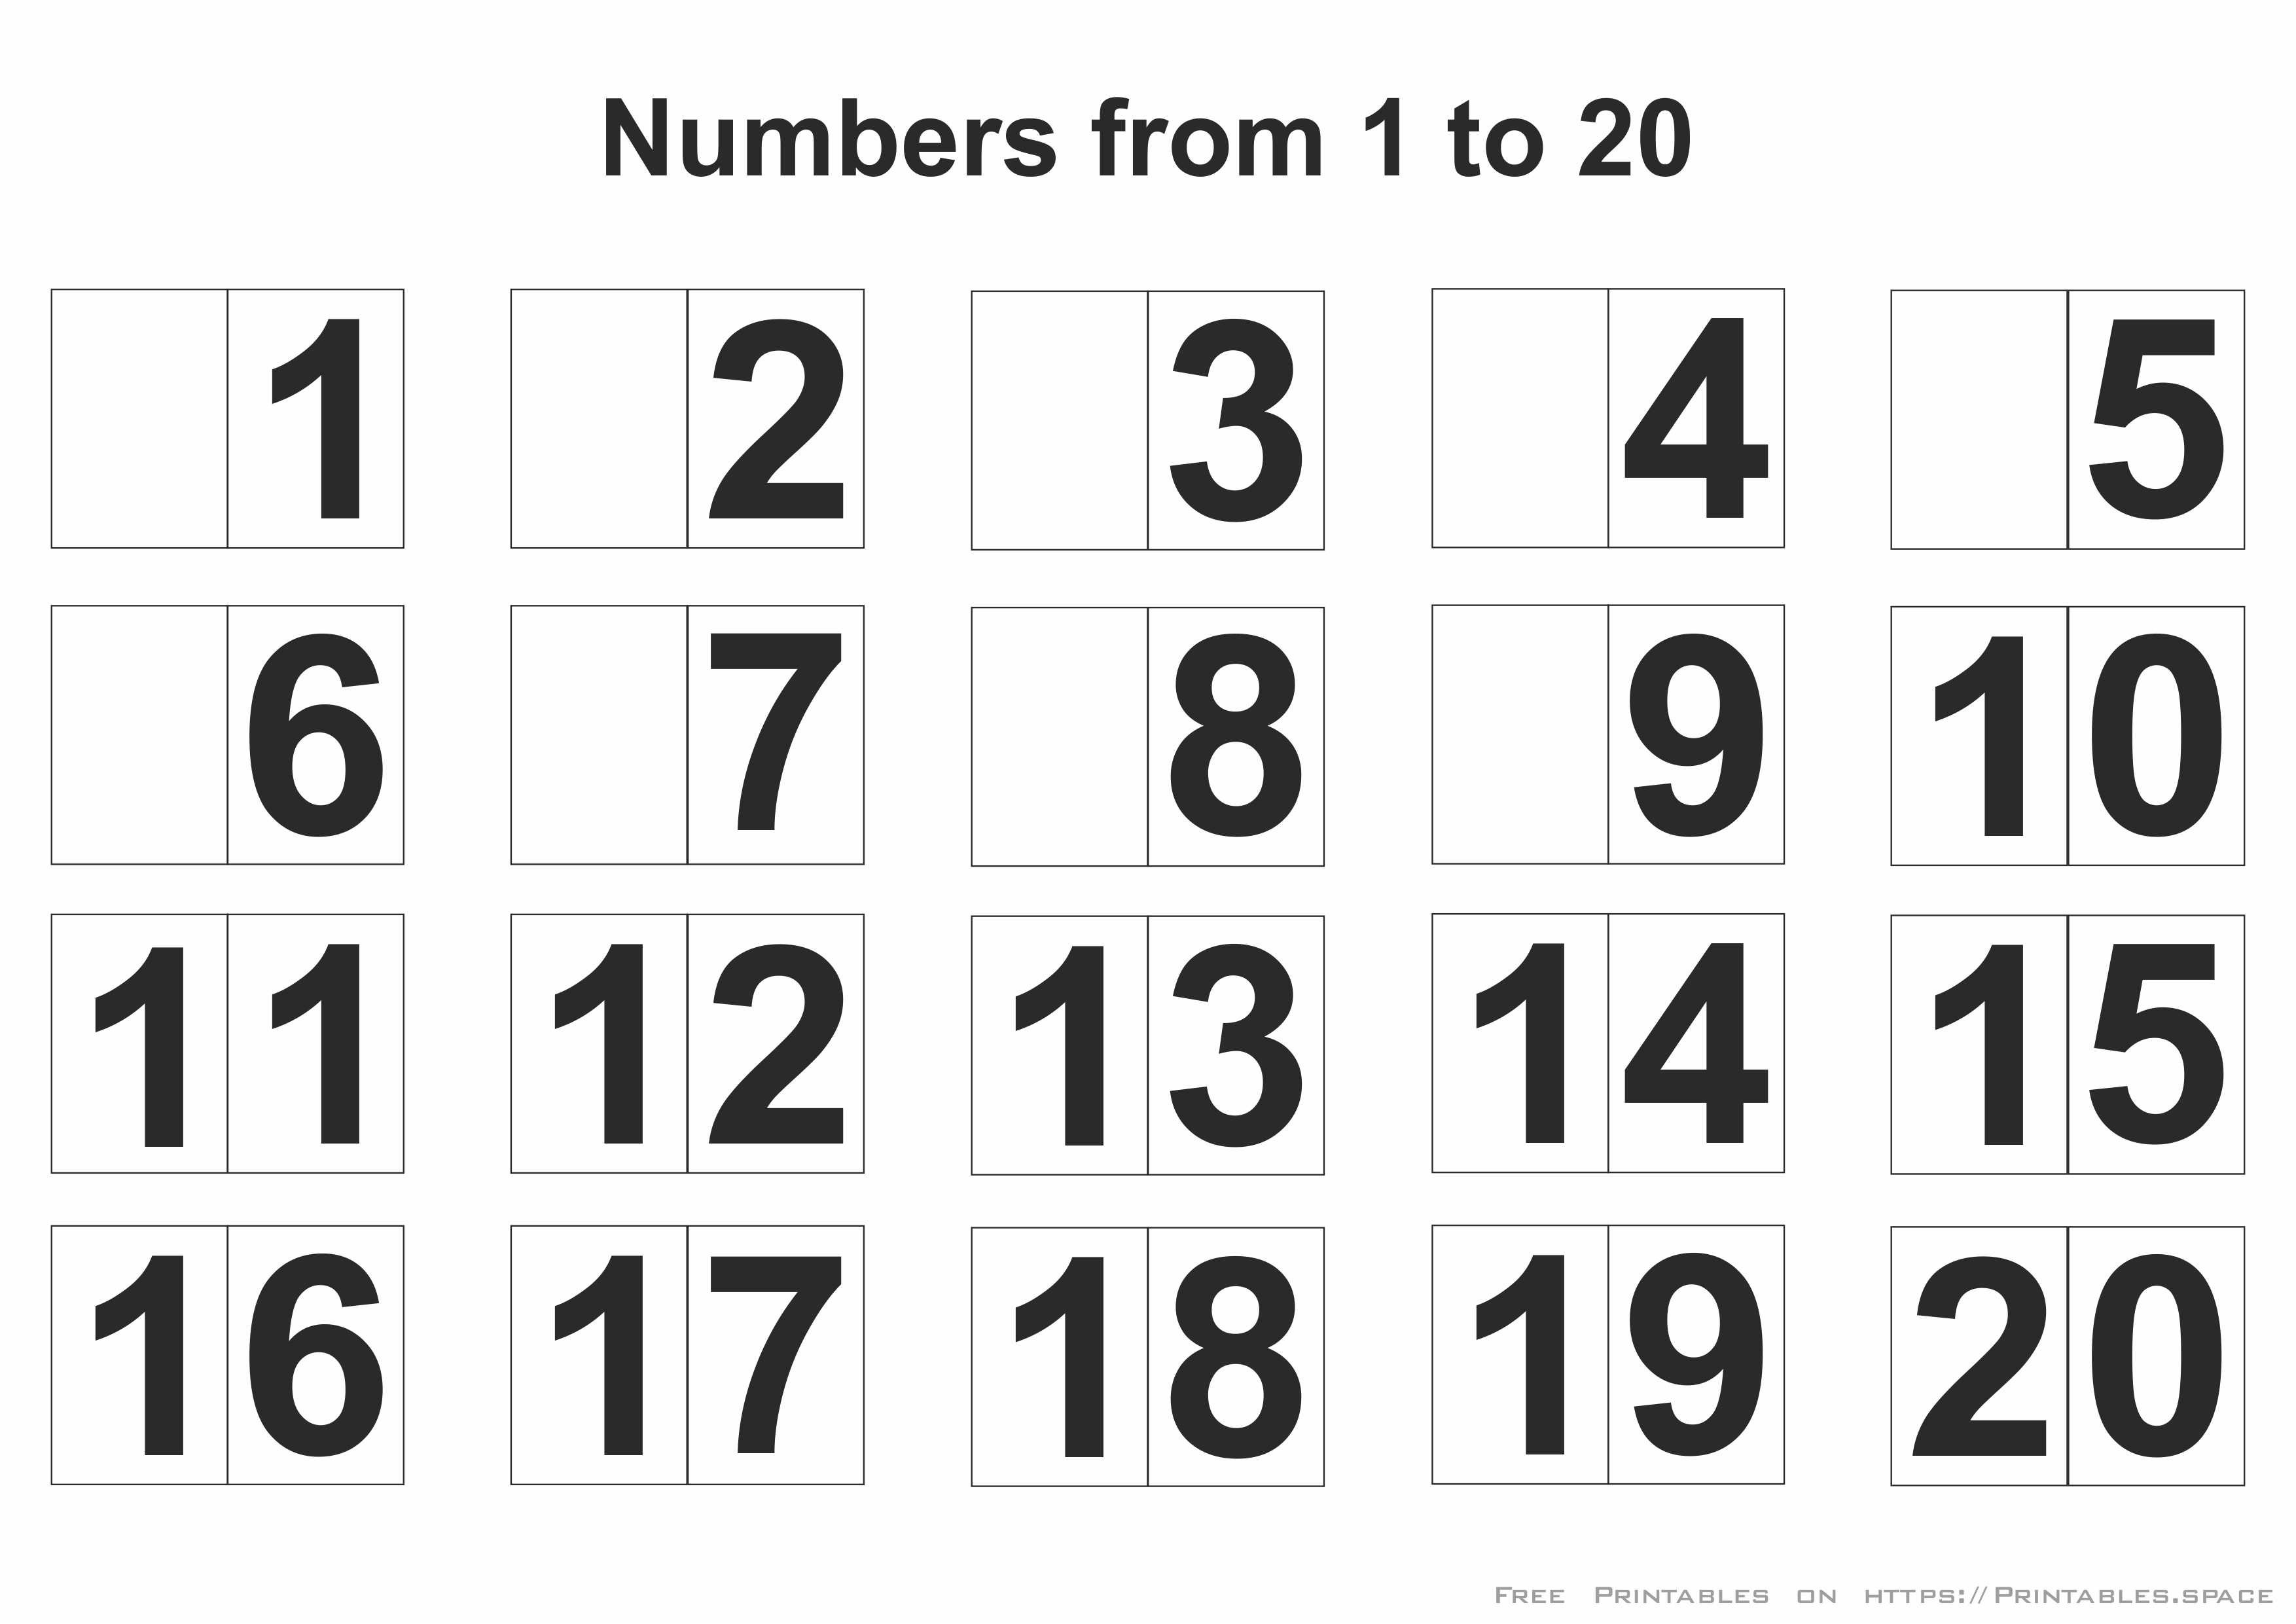 Printable Numbers 1-20 - Free Printables - Free Printable Numbers 1 20